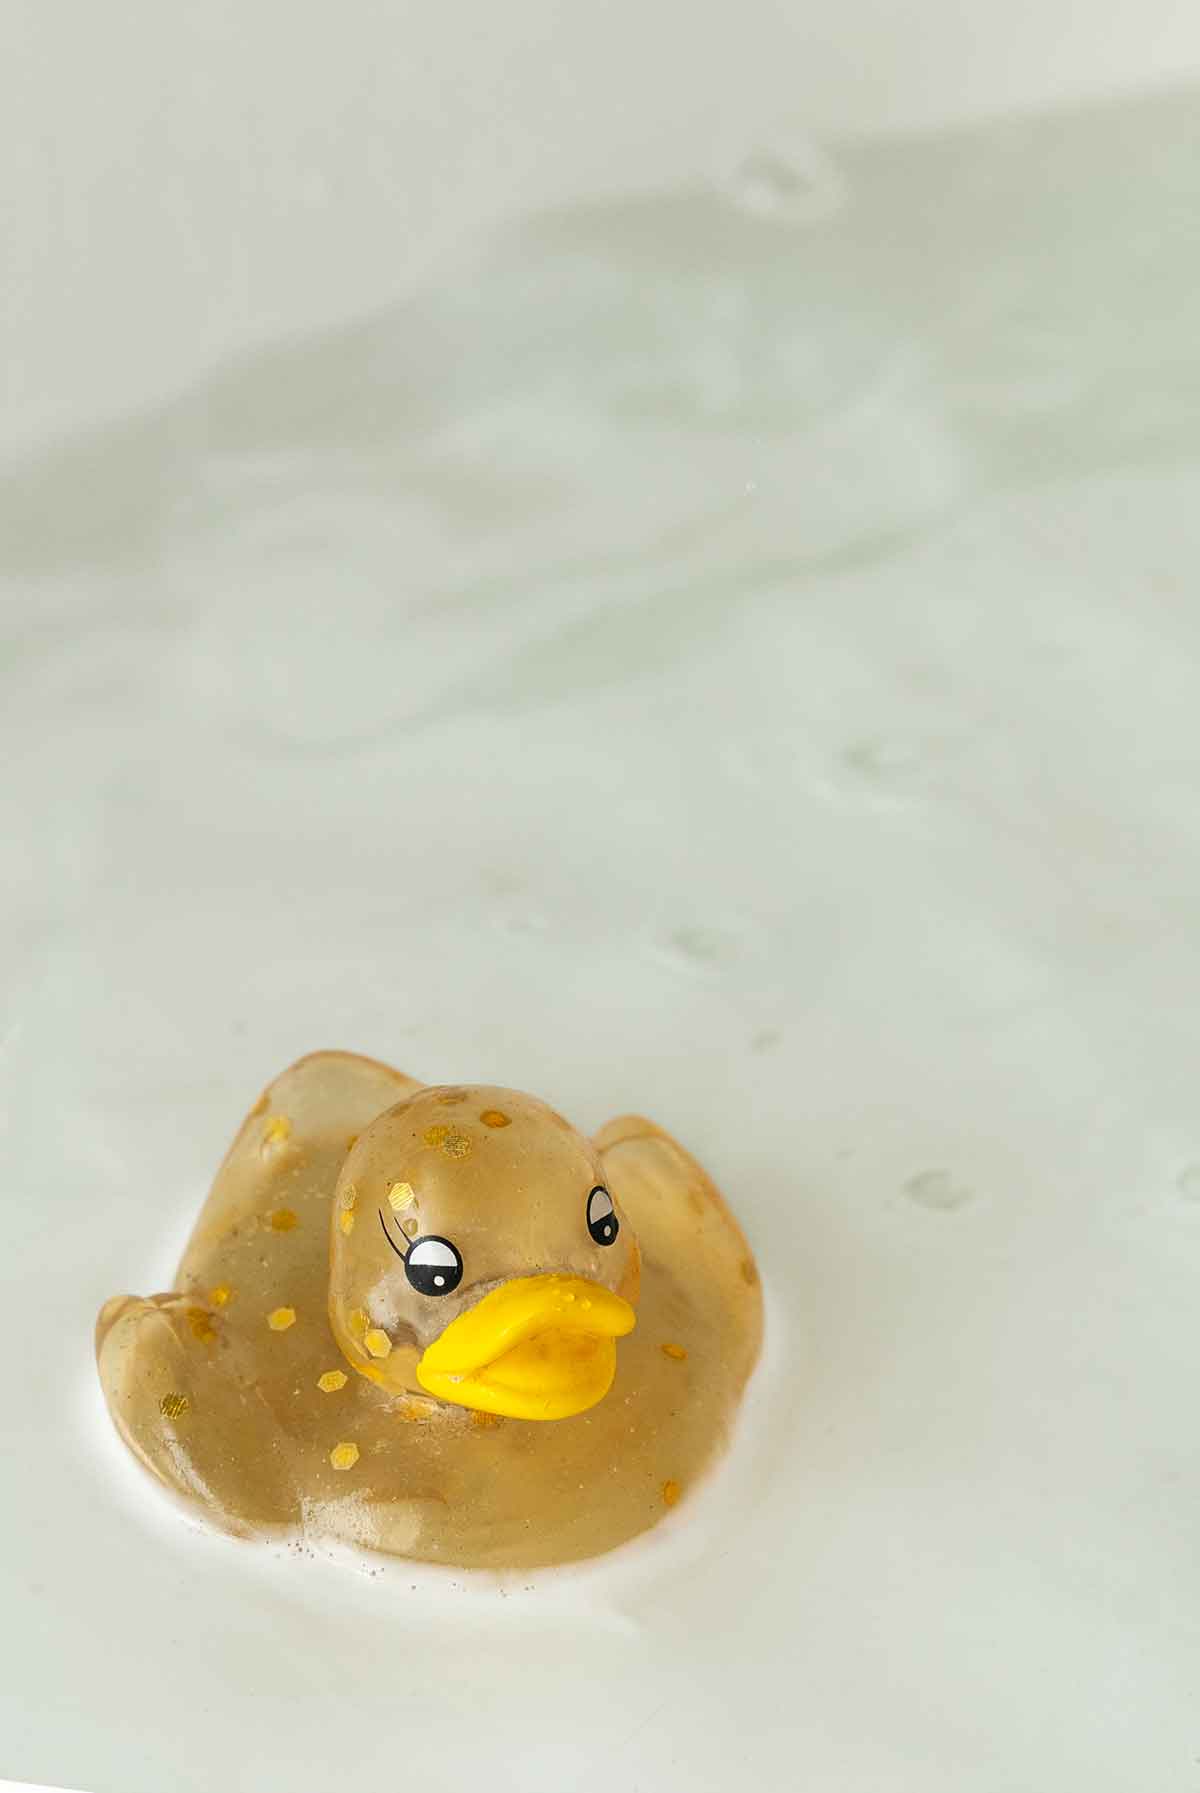 A rubber duck in a milky tub.